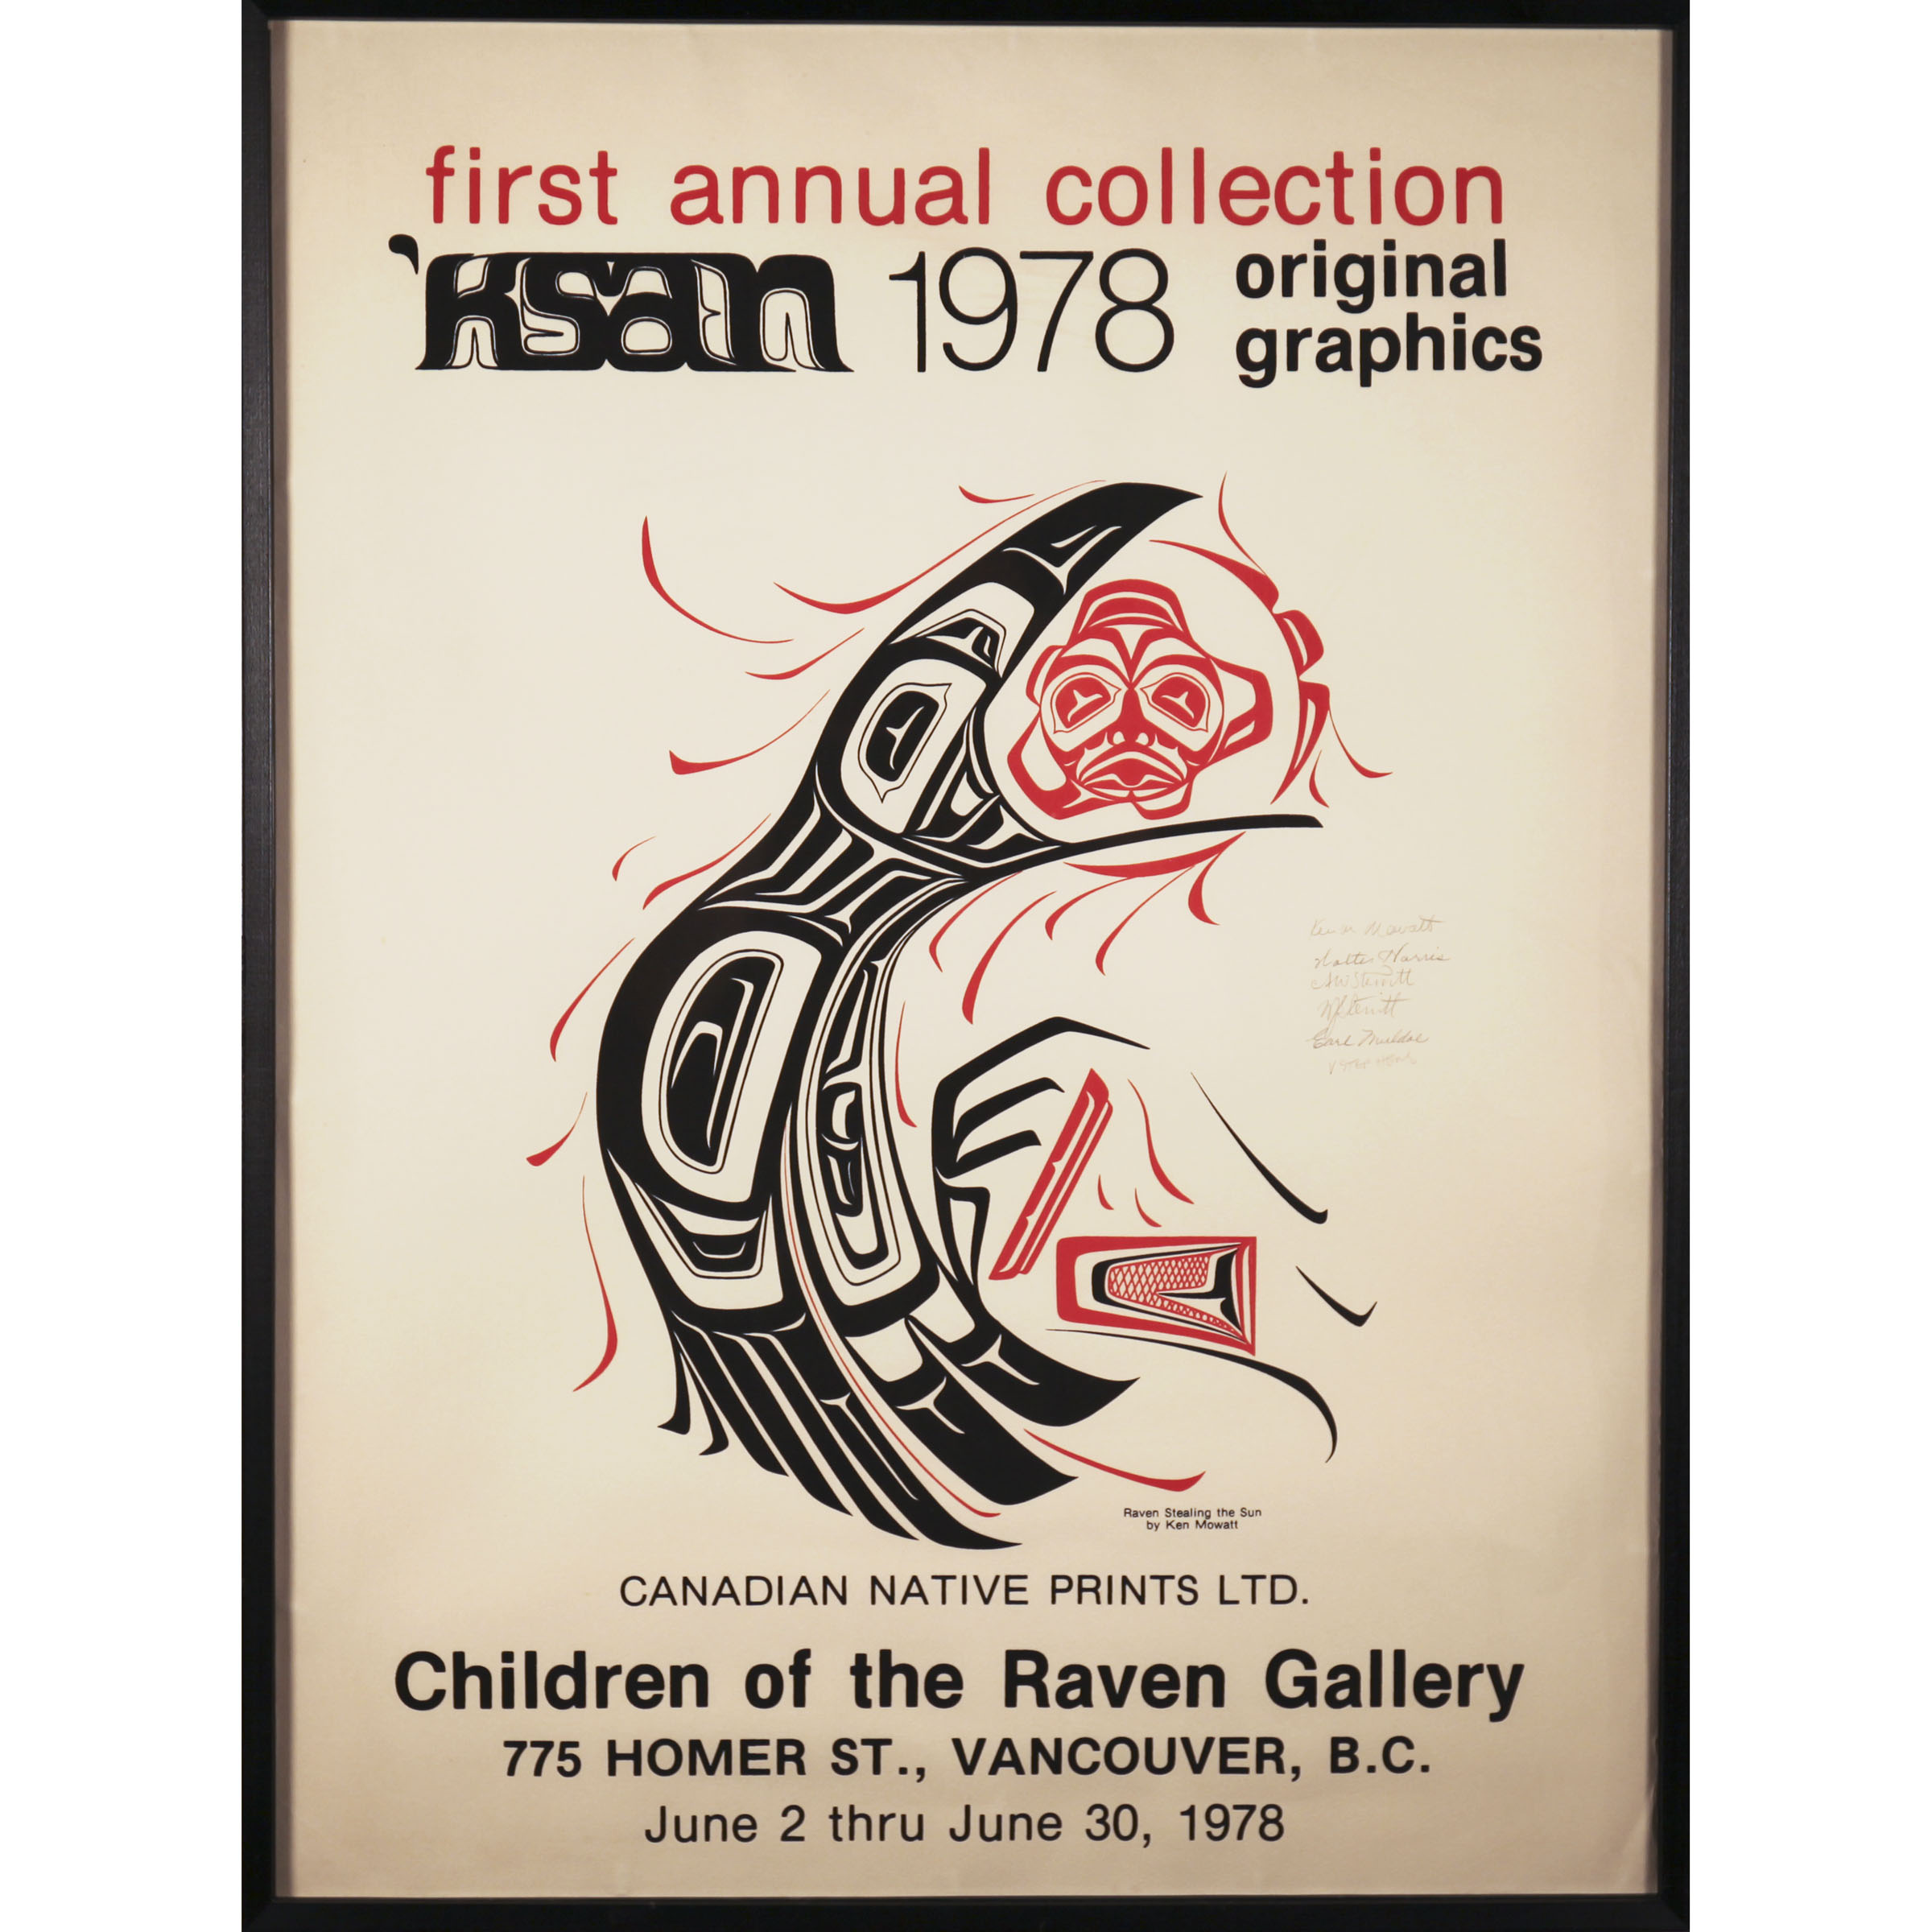 Children of the Raven Gallery Prints Collection Poster, 1978